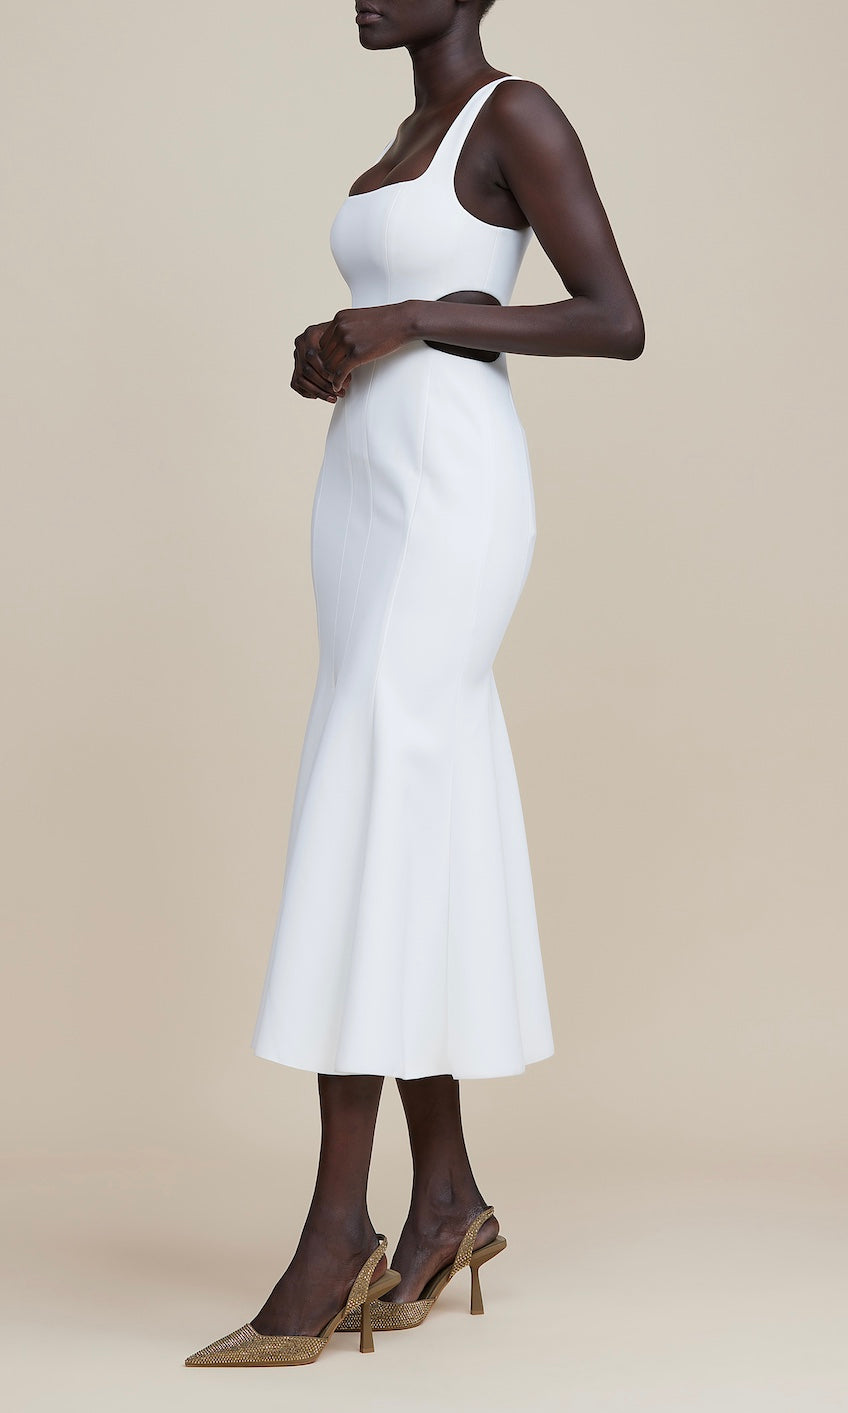 Acler Paracombe Dress In Cream - front view